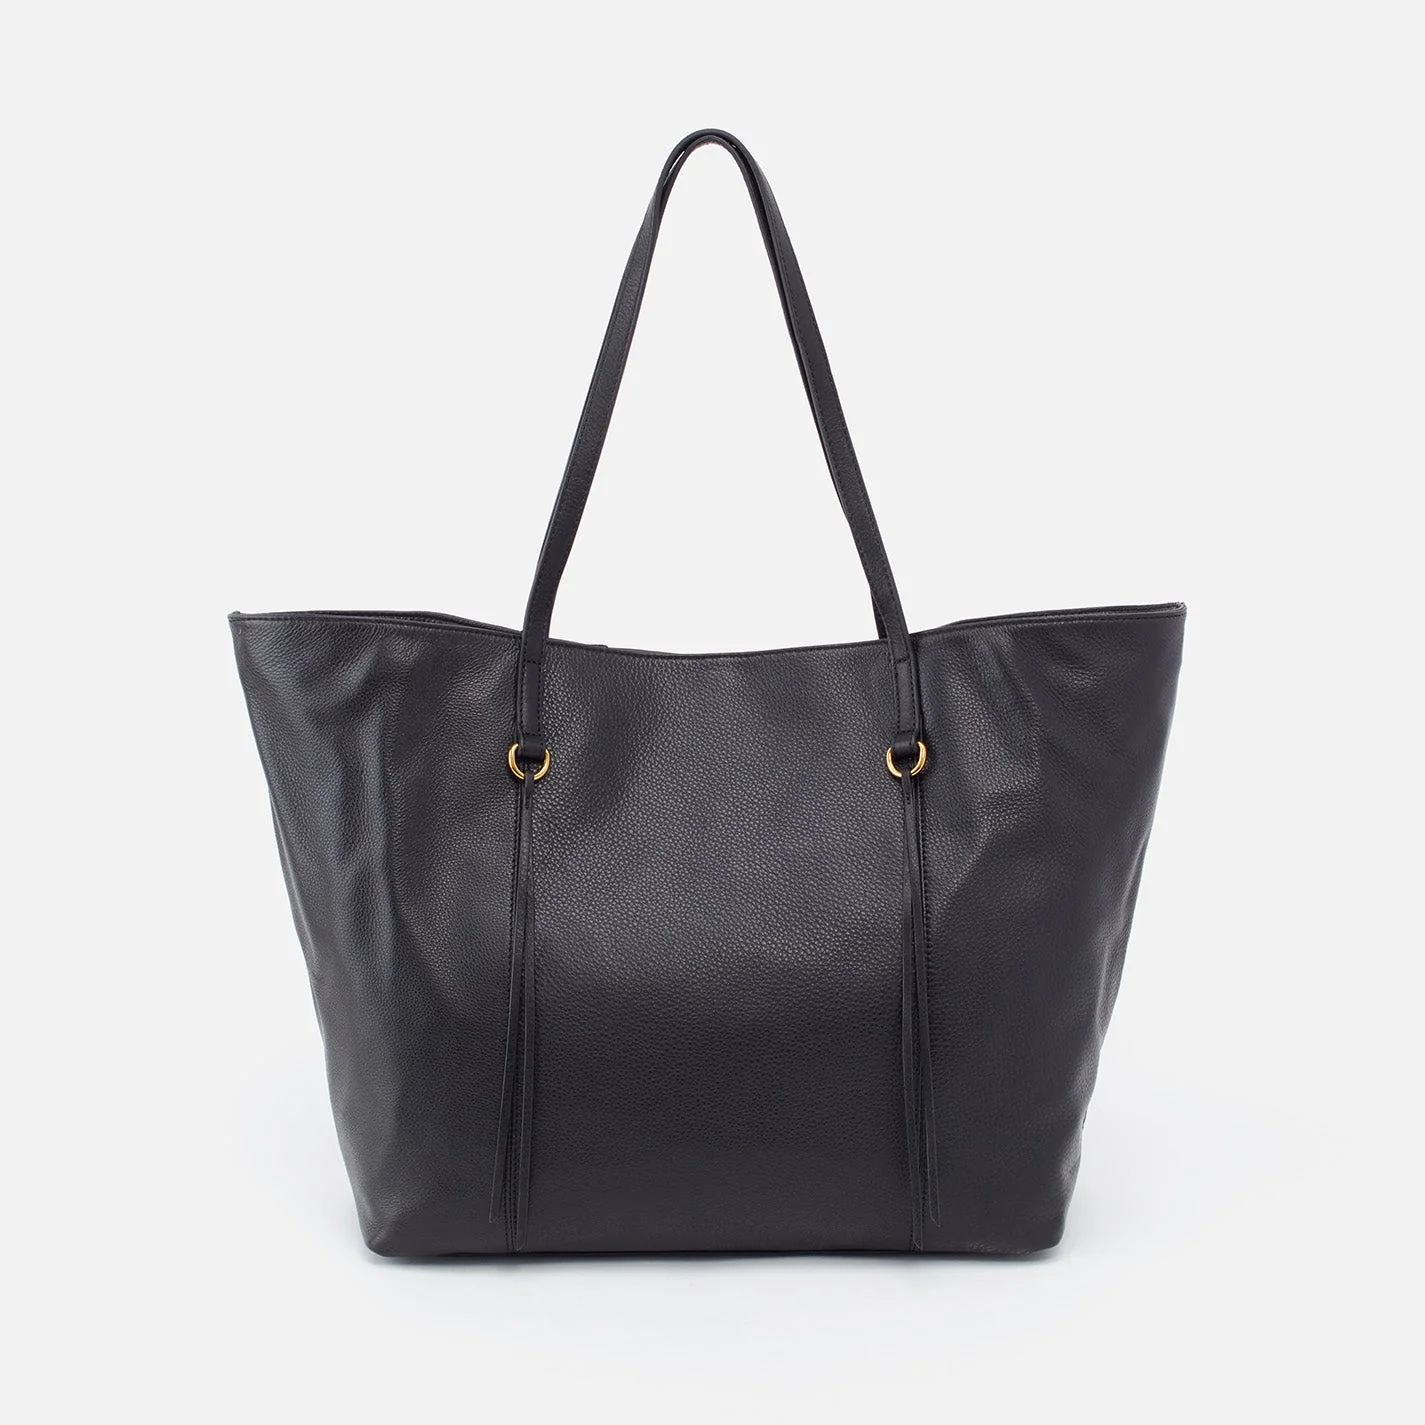 Kingston Large Tote in Pebbled Leather - Black | HOBO Bags